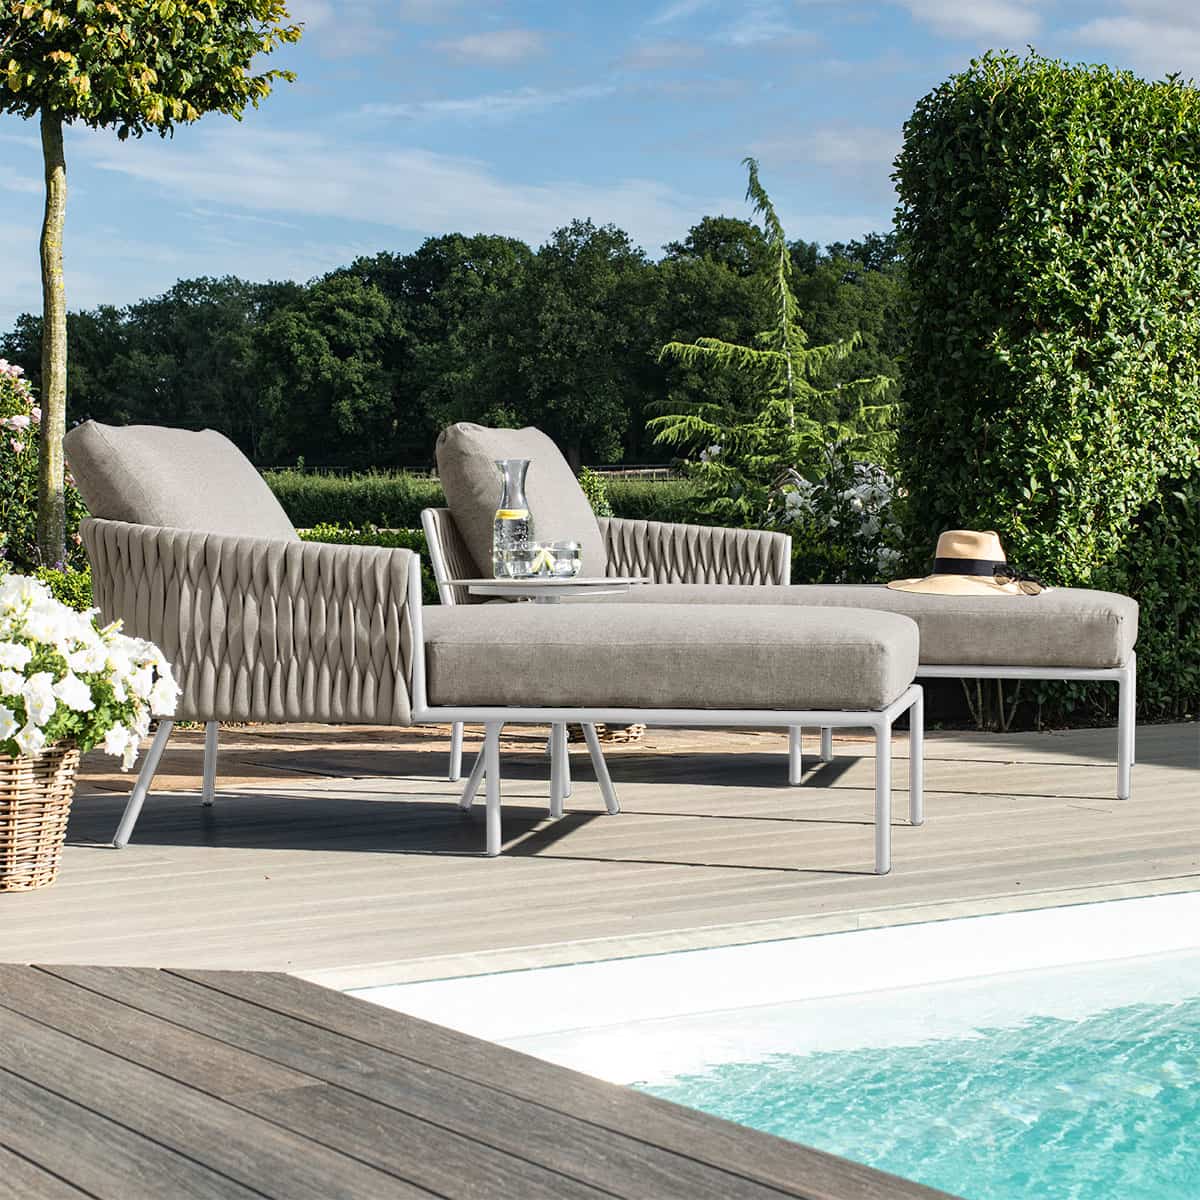 Marina Sunlounger Set with Side Table Sandstone / Beige Rope and Aluminium Outdoor Furniture #colour_sandstone